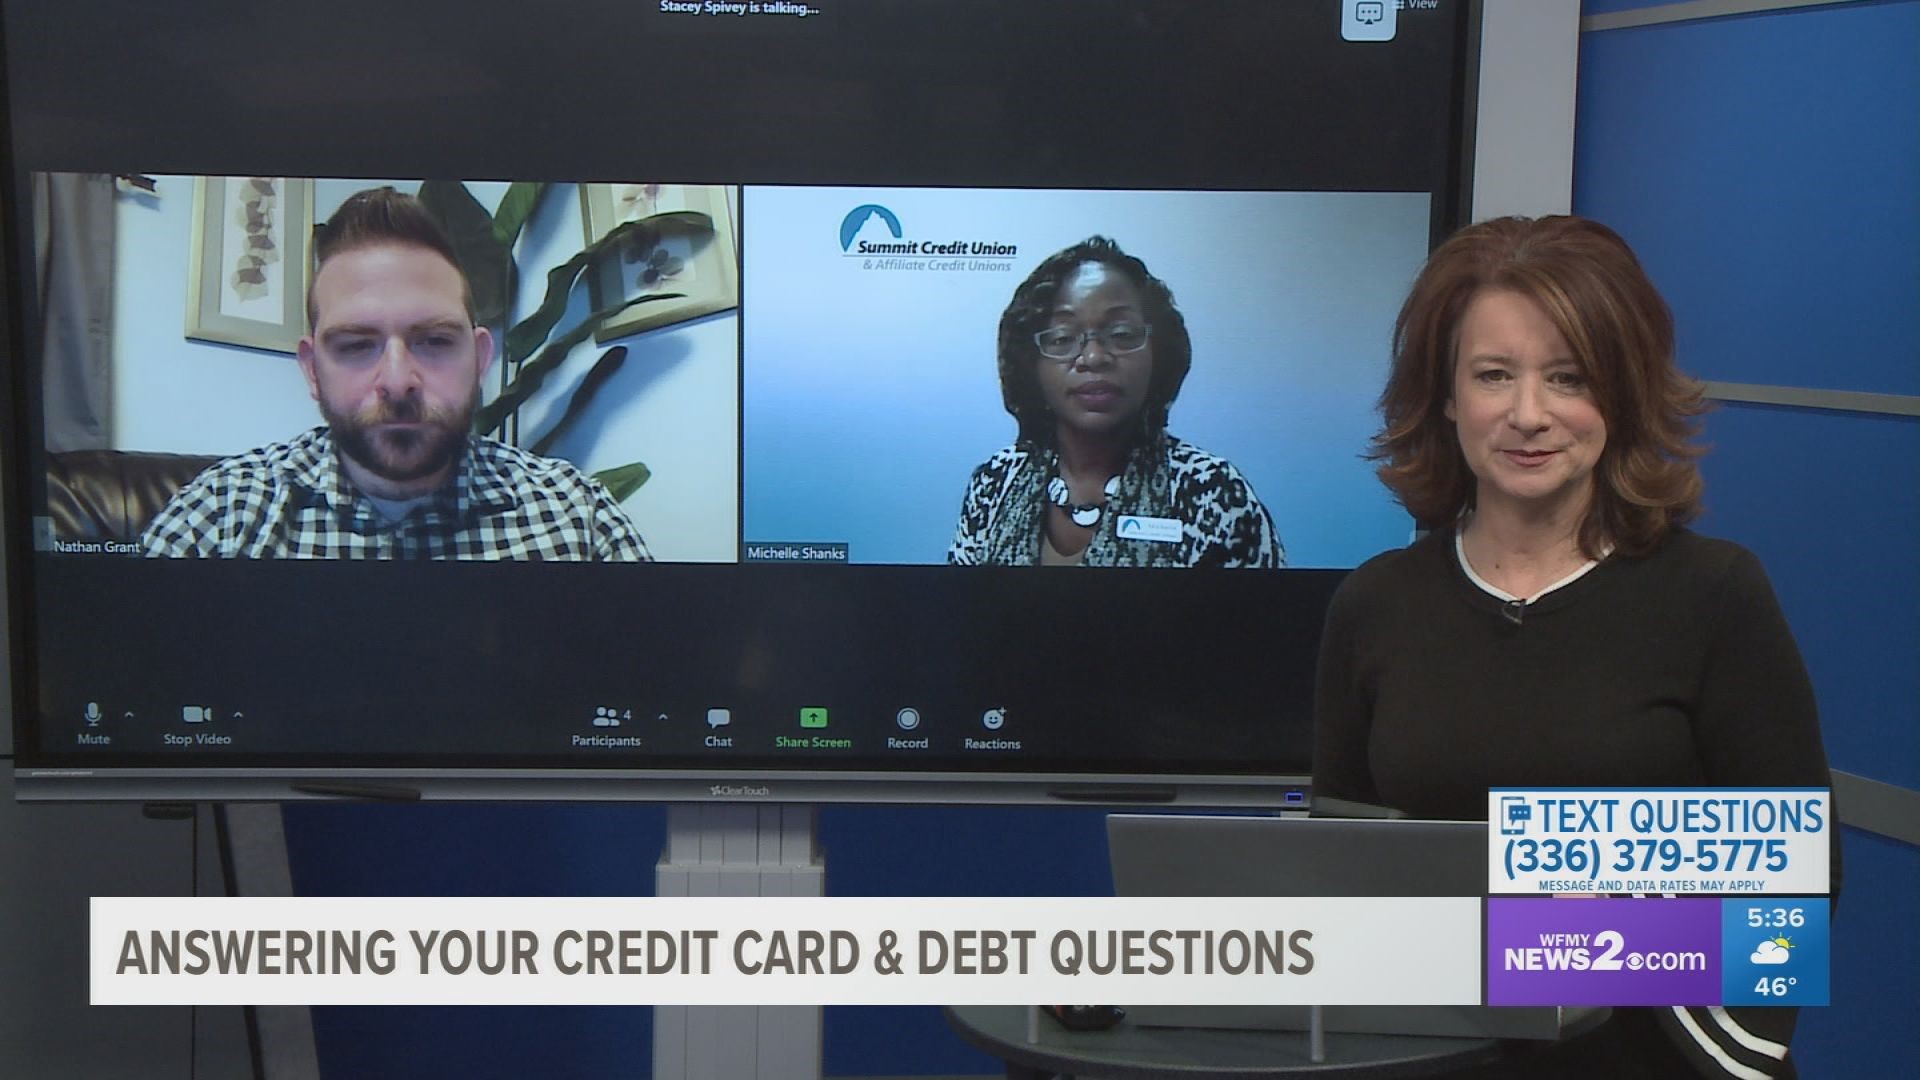 Experts from CreditCardInsider.com and Summit Credit Union answer your money and debt questions.